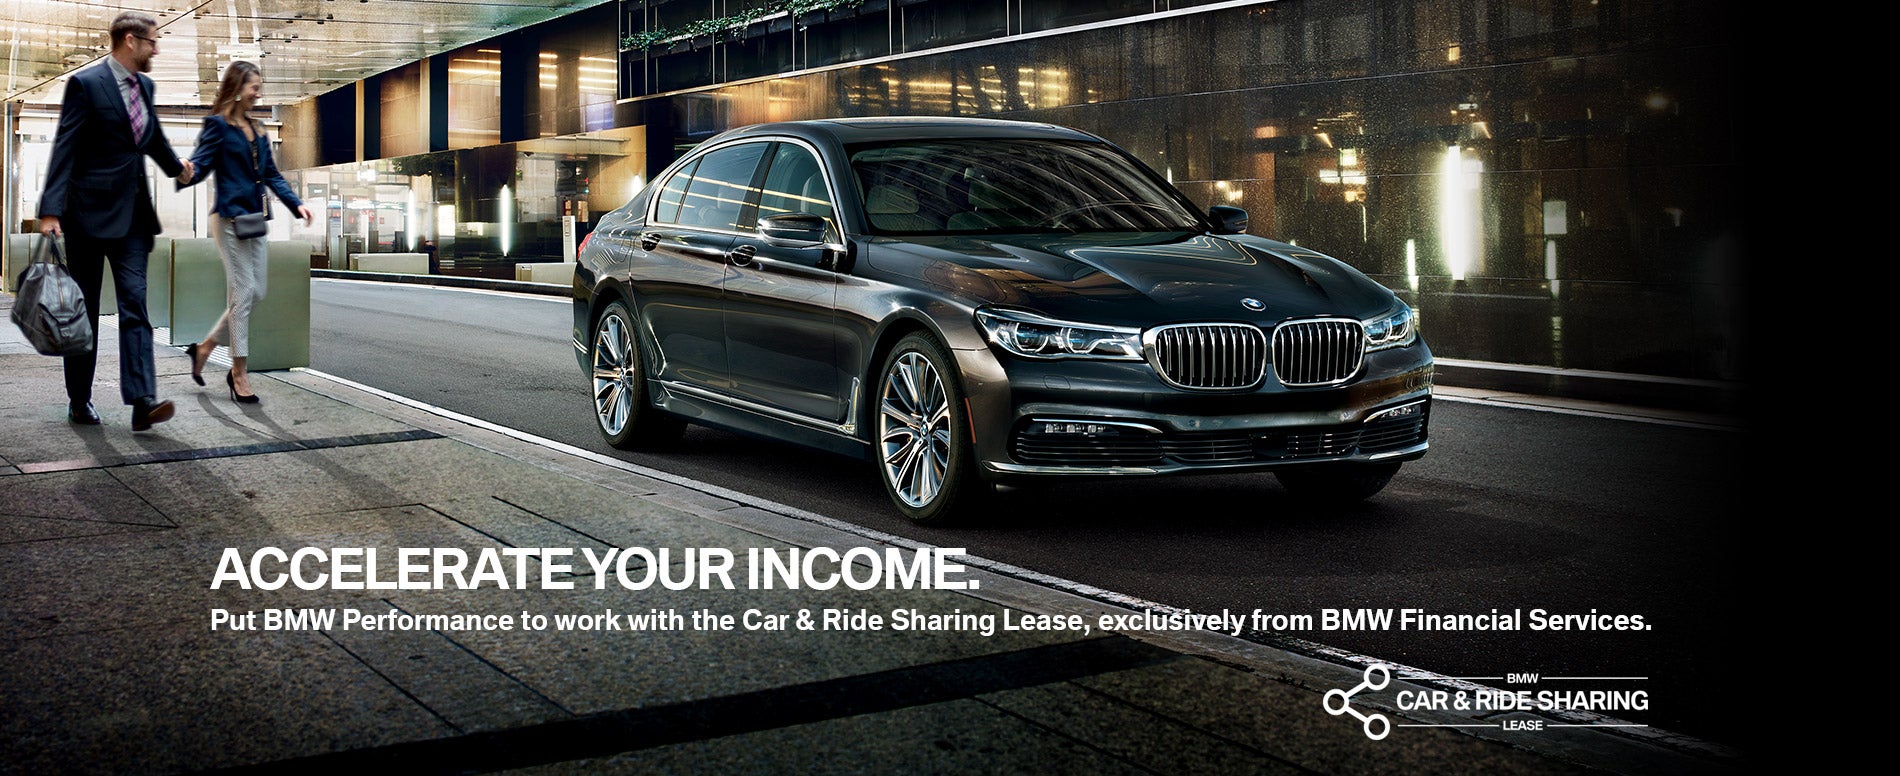 The BMW Car & Ride Sharing Lease at BMW of Tuscaloosa in Tuscaloosa AL